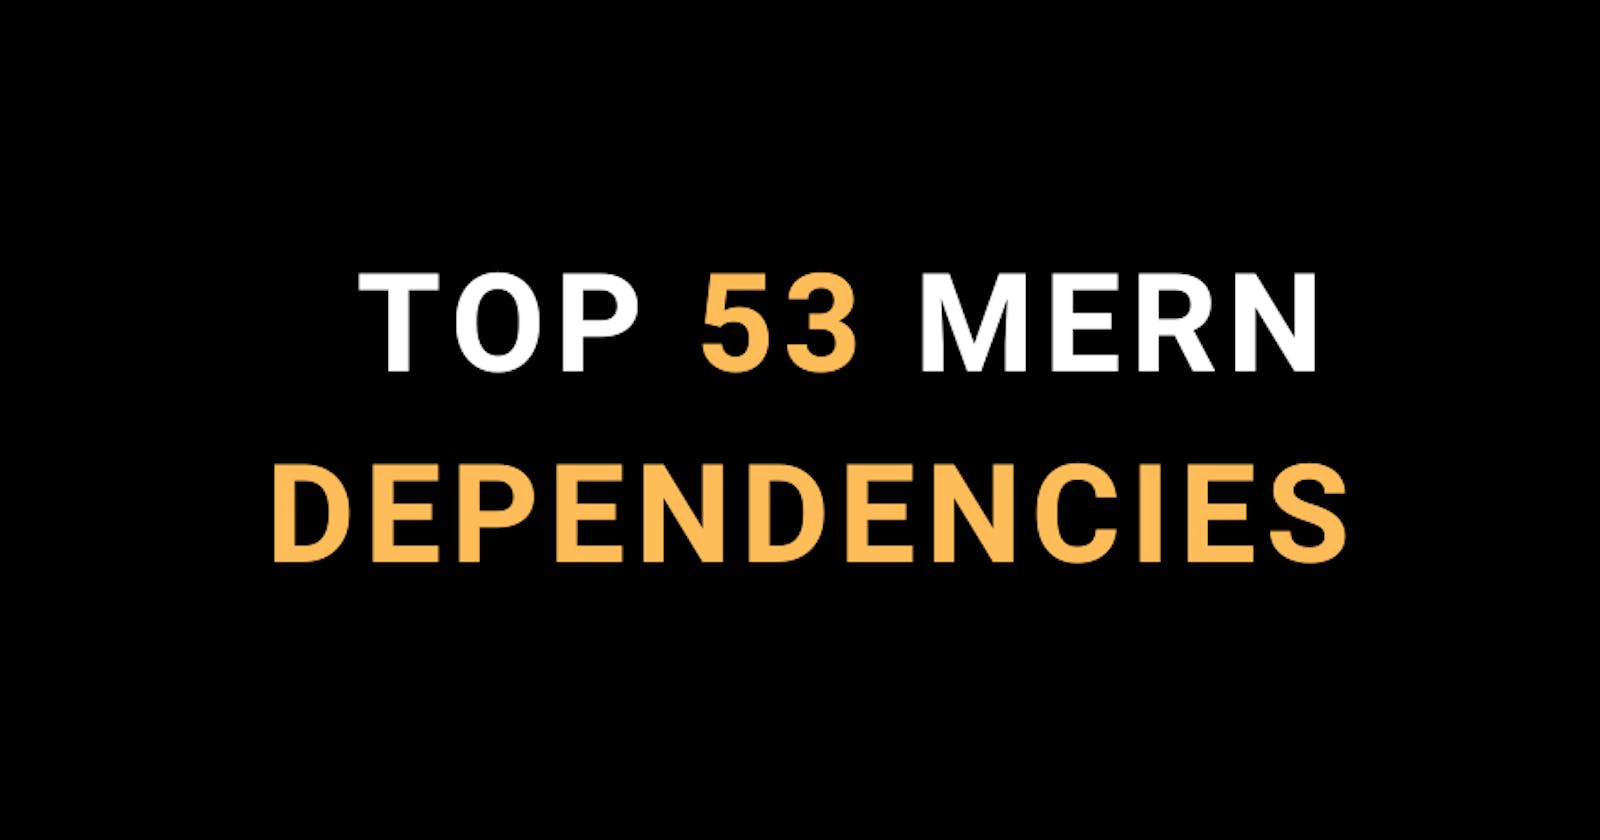 Here are 53 dependencies used in the MERN stack.